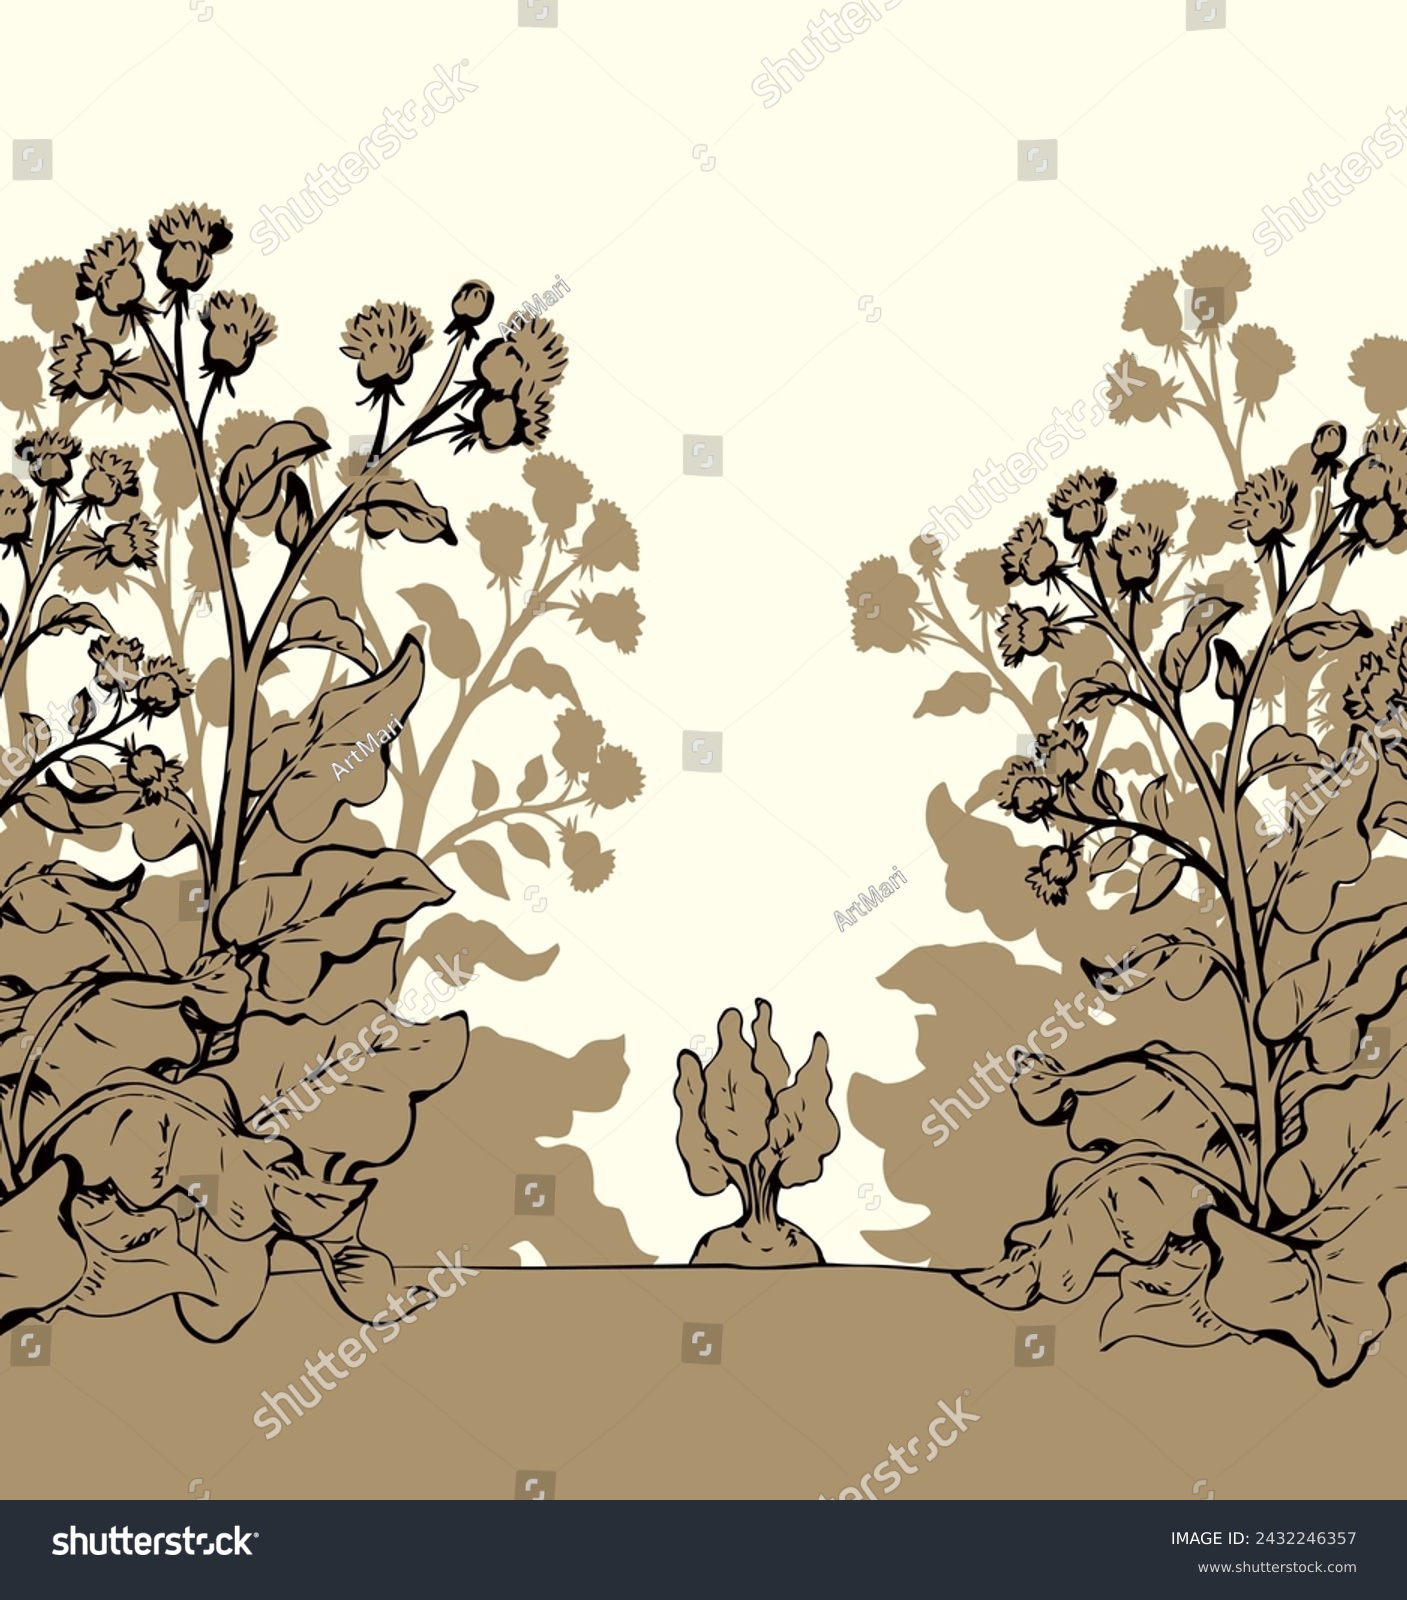 Big green row grass thorn burdock bloom outdoor yard scene outline black hand drawn farmer root eco bio turnip seed eat fight sign icon symbol. Closeup scenic view retro art doodle line sky text space #2432246357